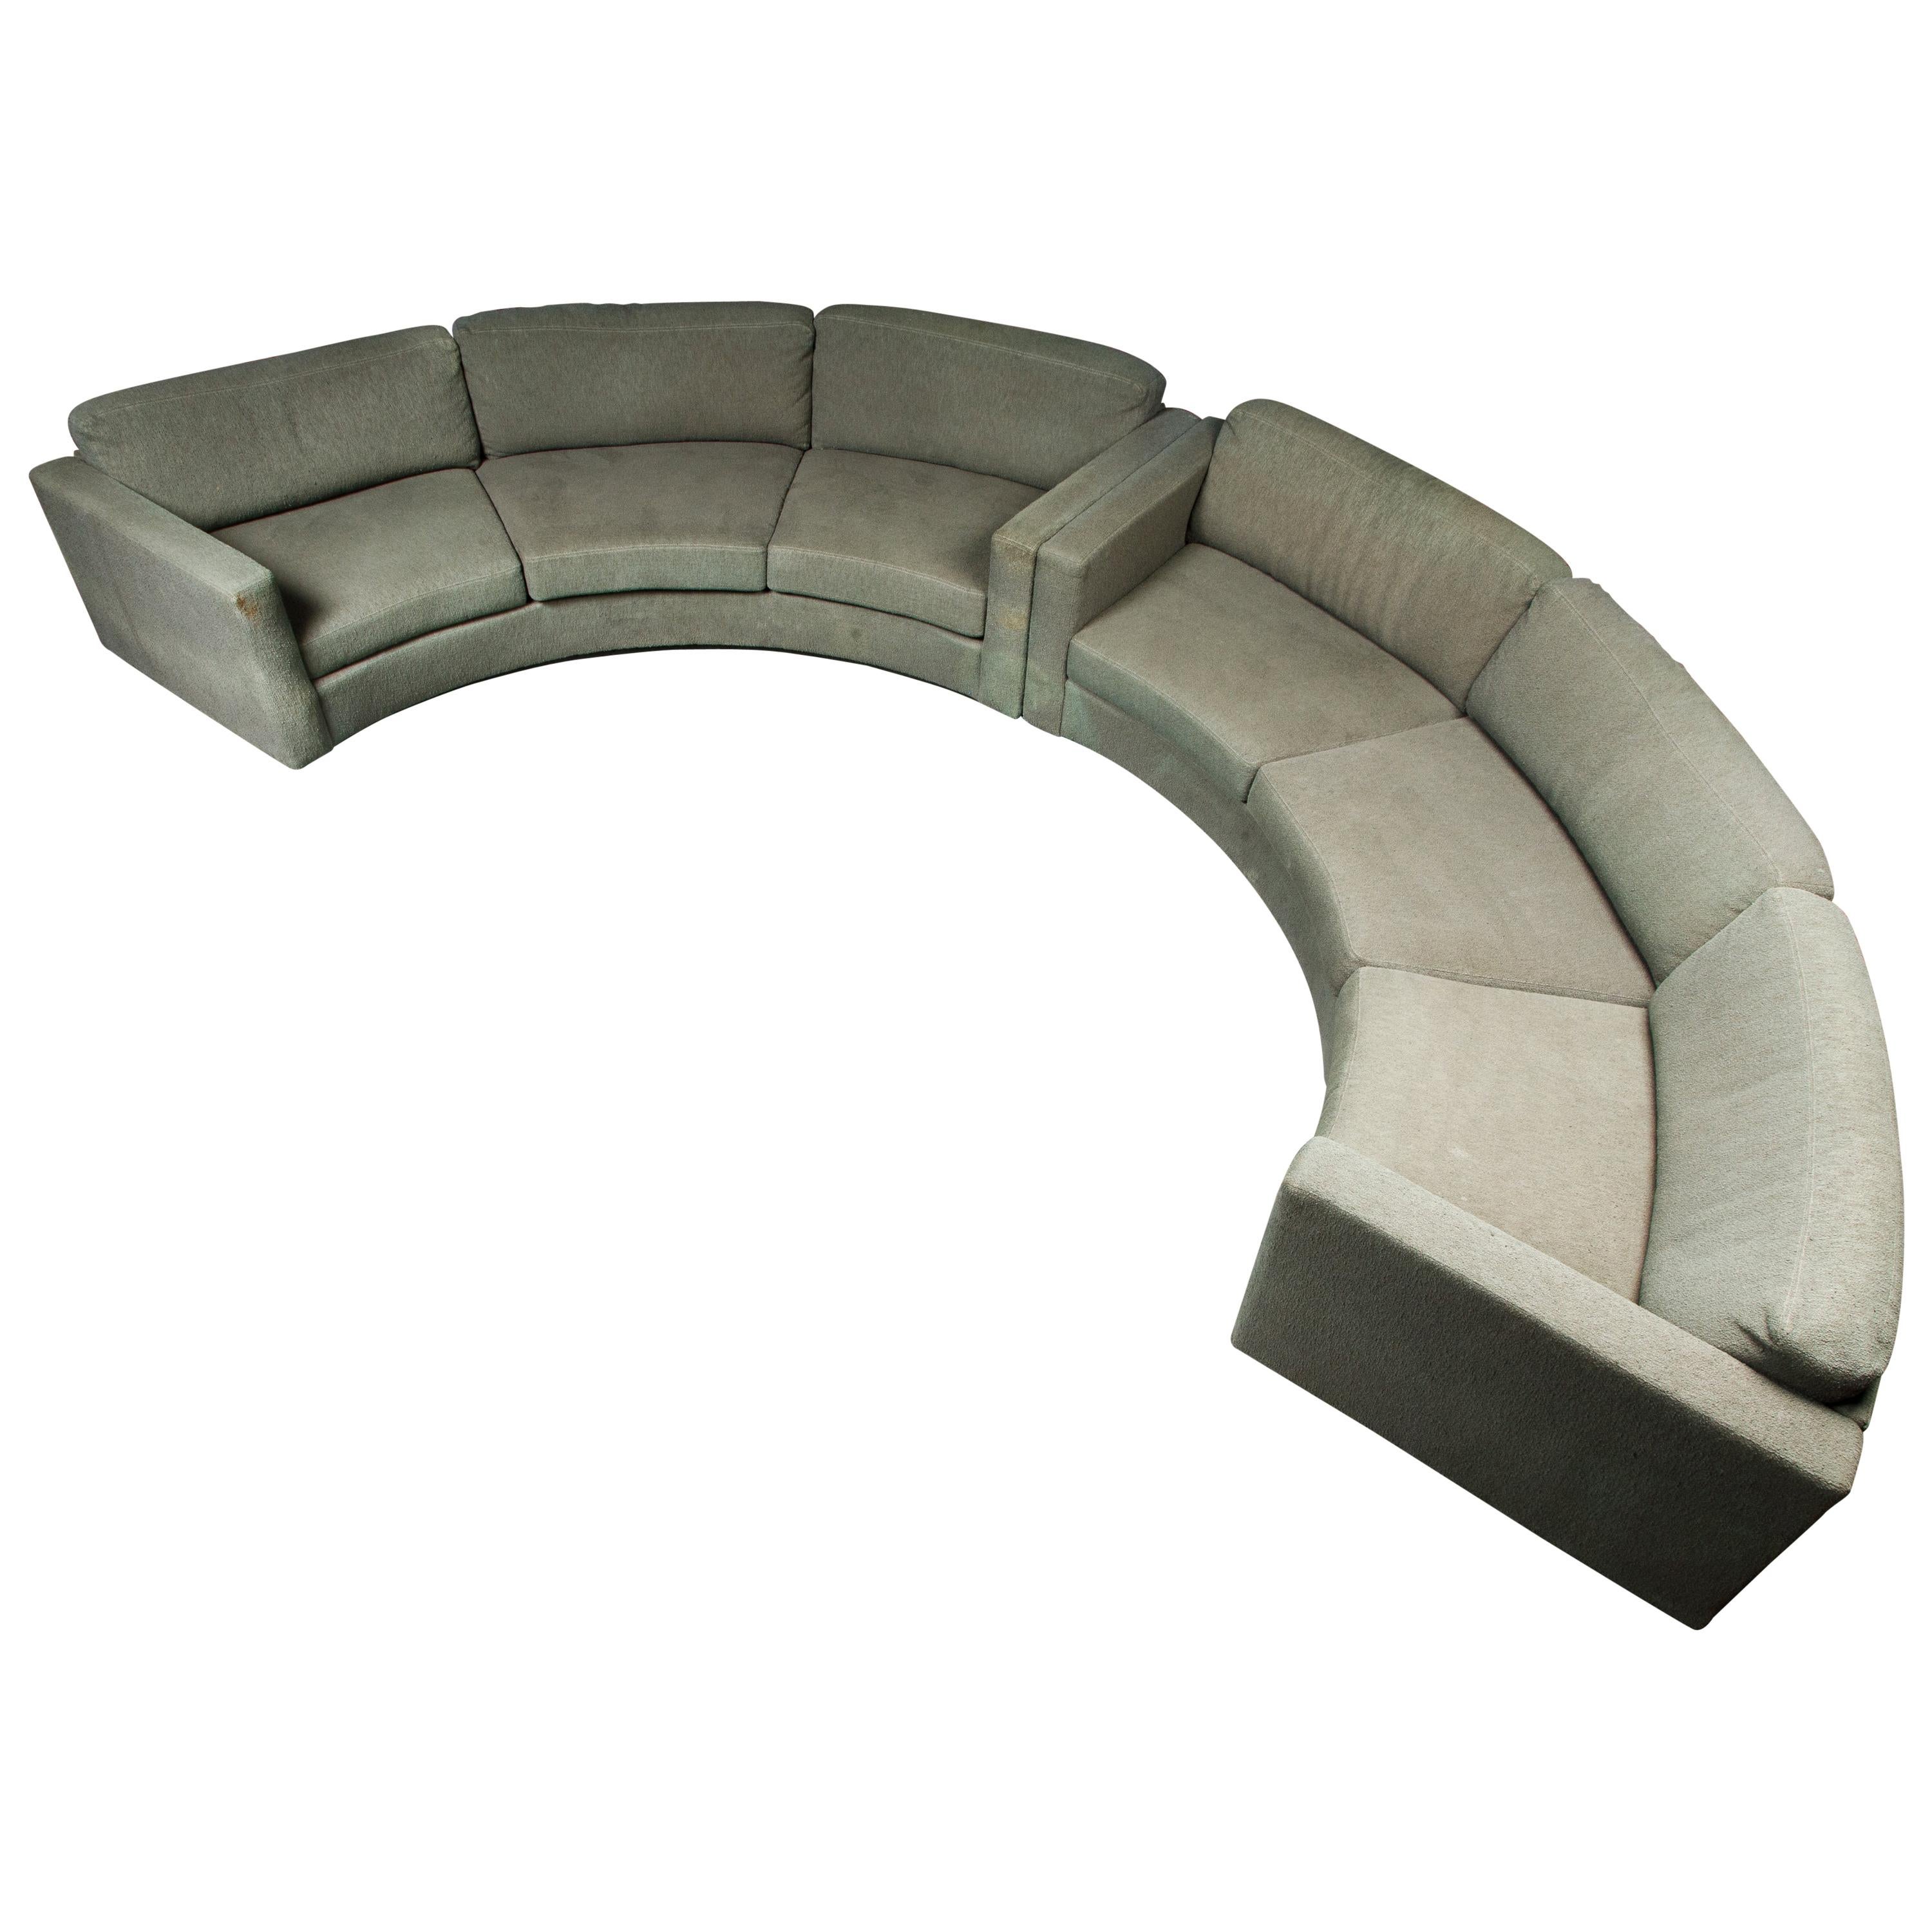 Milo Baughman for Thayer Coggin Curved Semi-Circle Sectional Sofa, Signed